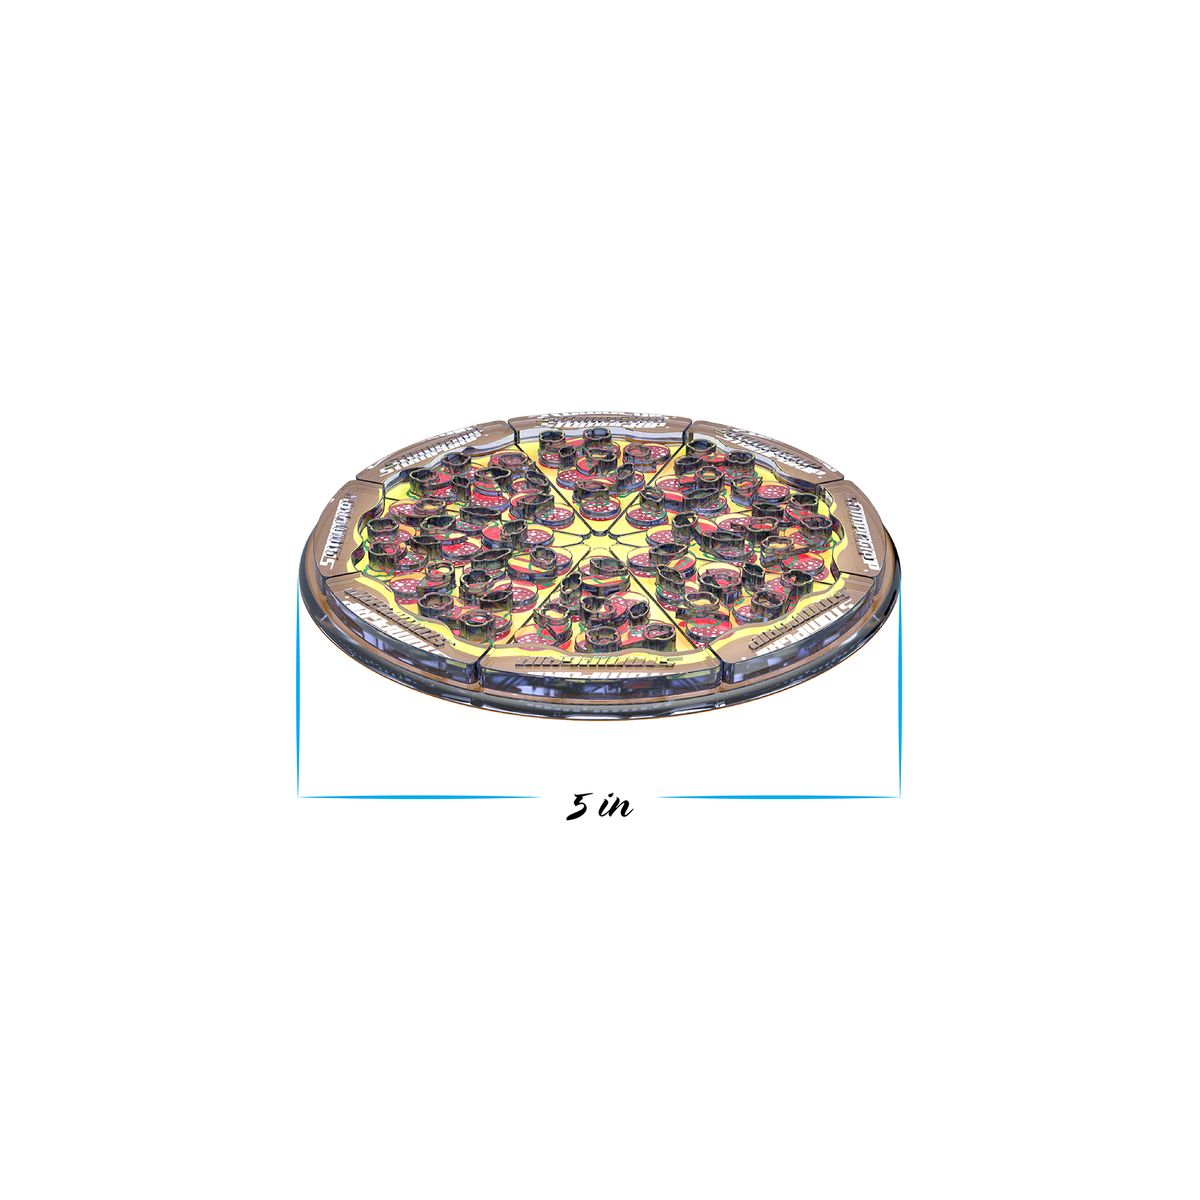 Pizza Stomp Pad : Vice Collection